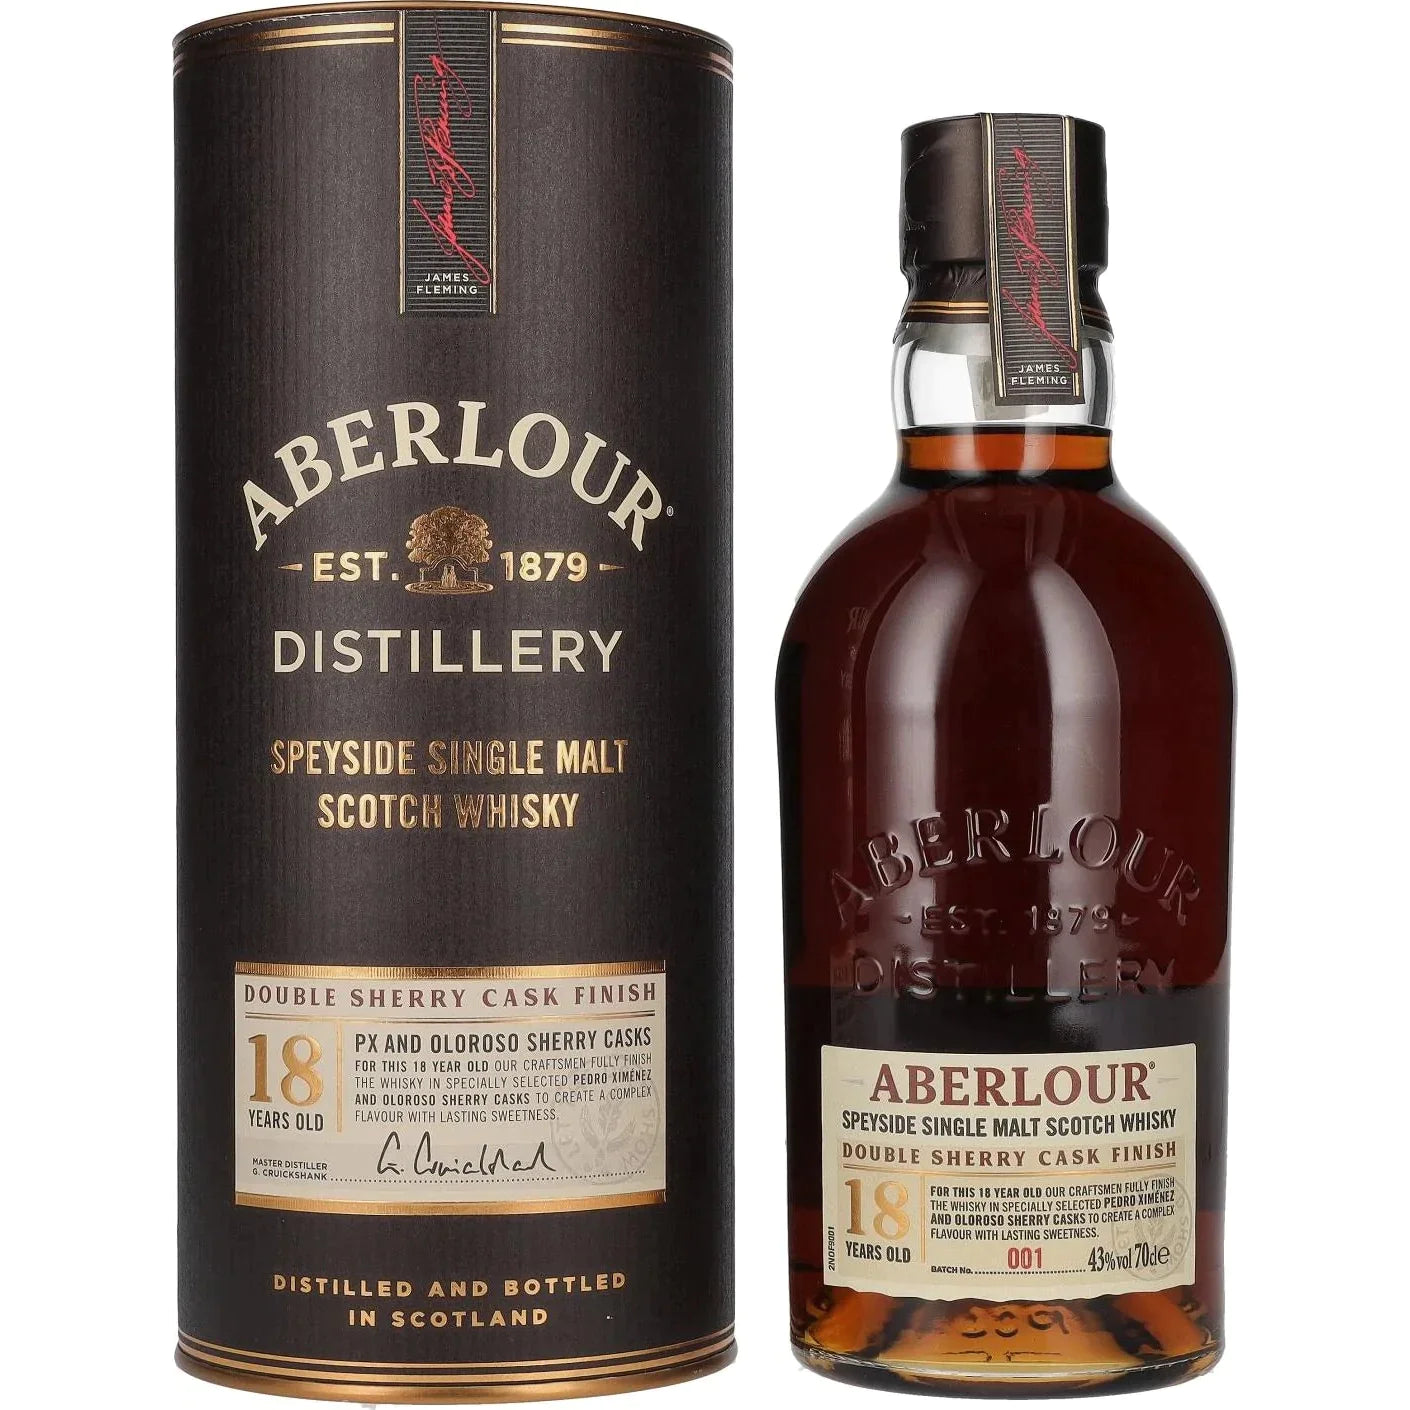 Aberlour 18 Years Old Double Sherry Cask Finish 43% Vol. 0,7l in Giftbox